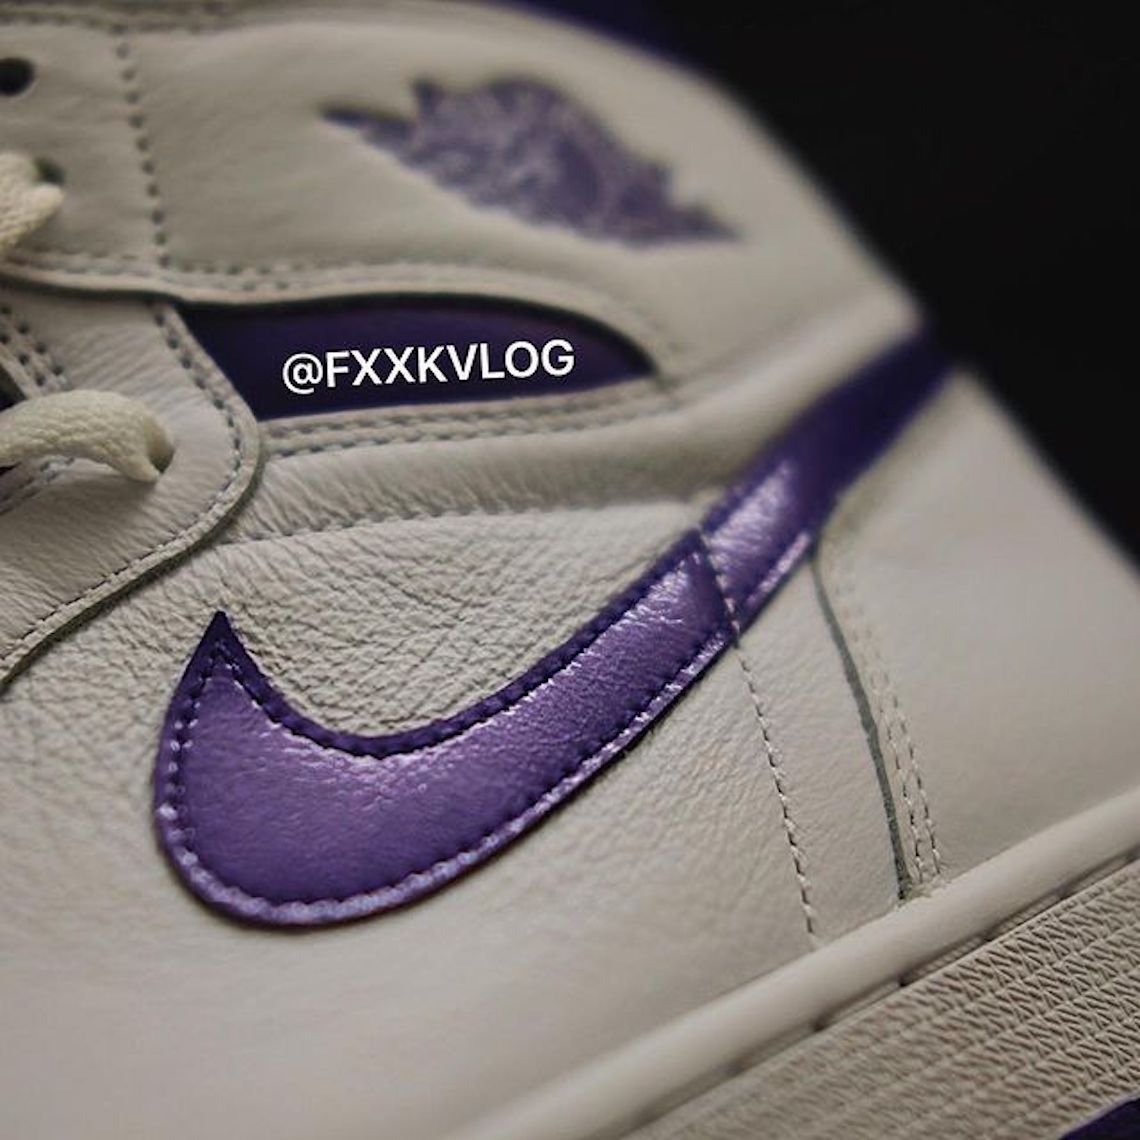 Synthetic leather strap with Jordan branding Retro High Og Wmns White Court Purple Cd0461 151 19